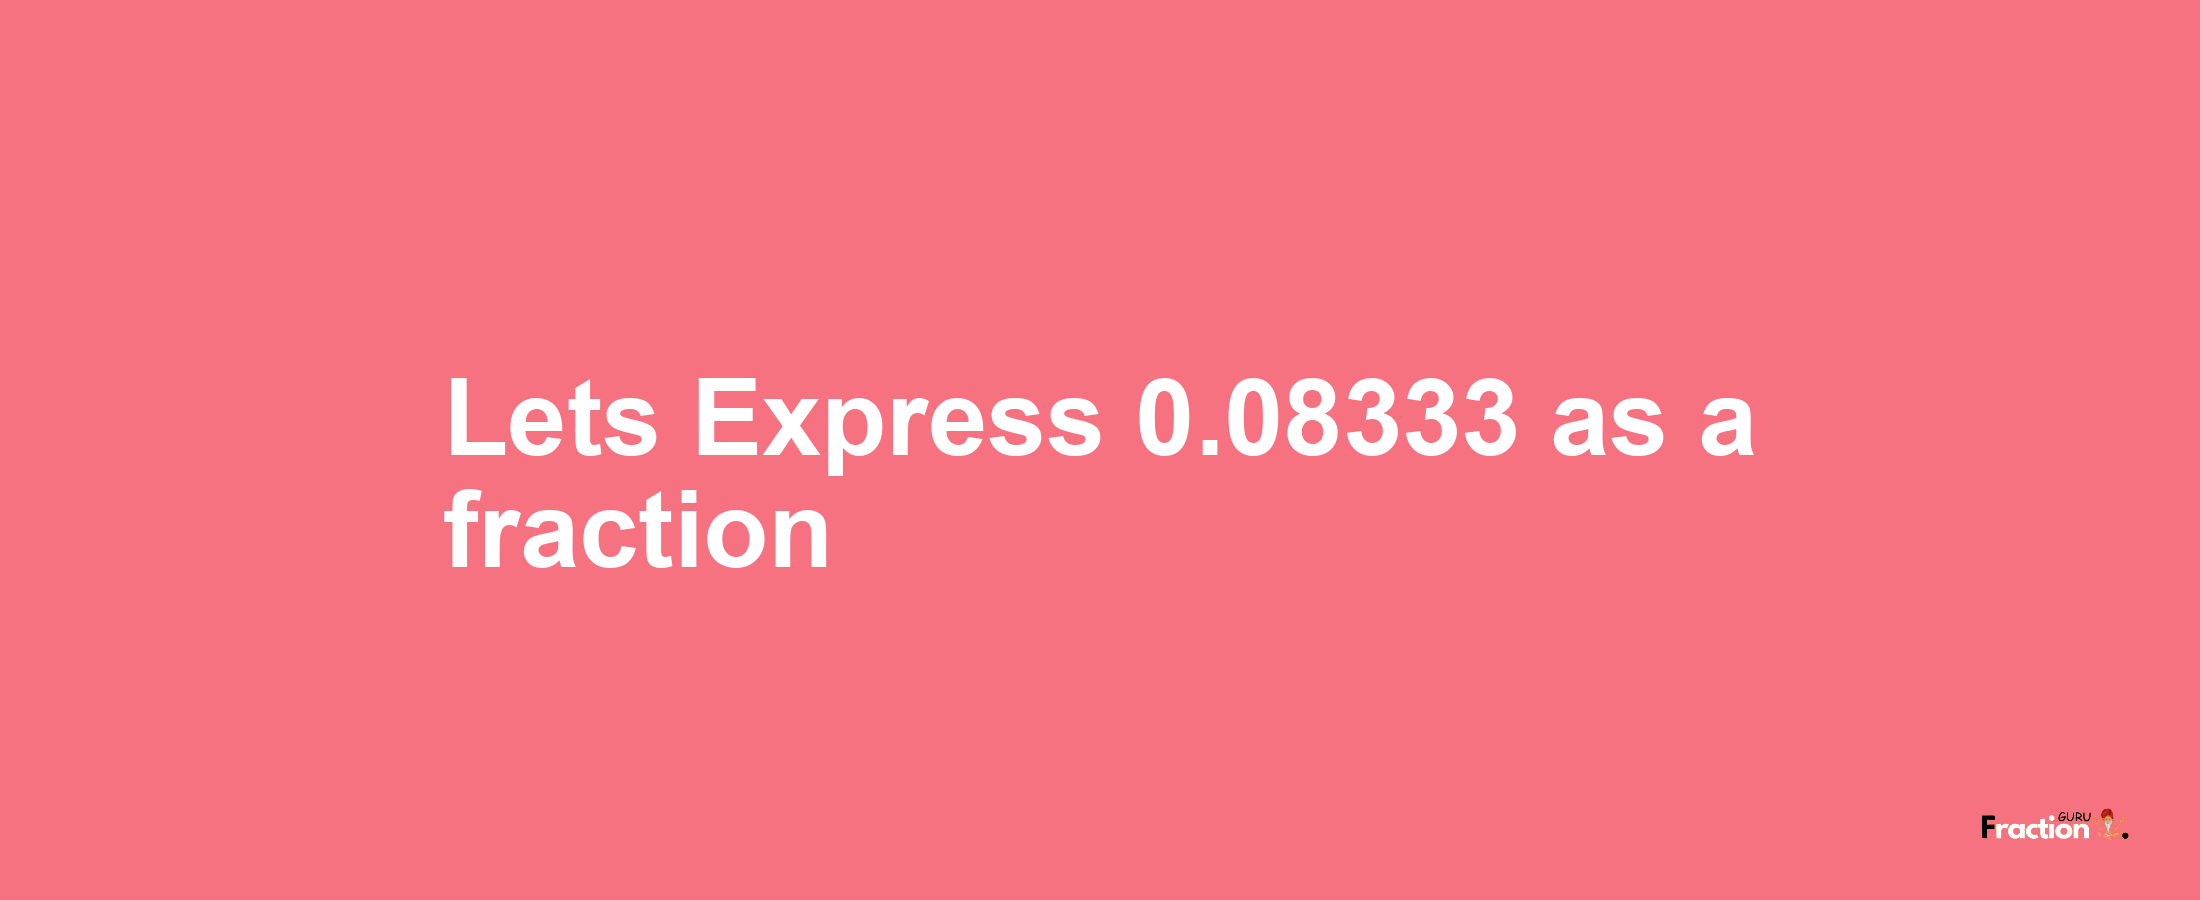 Lets Express 0.08333 as afraction